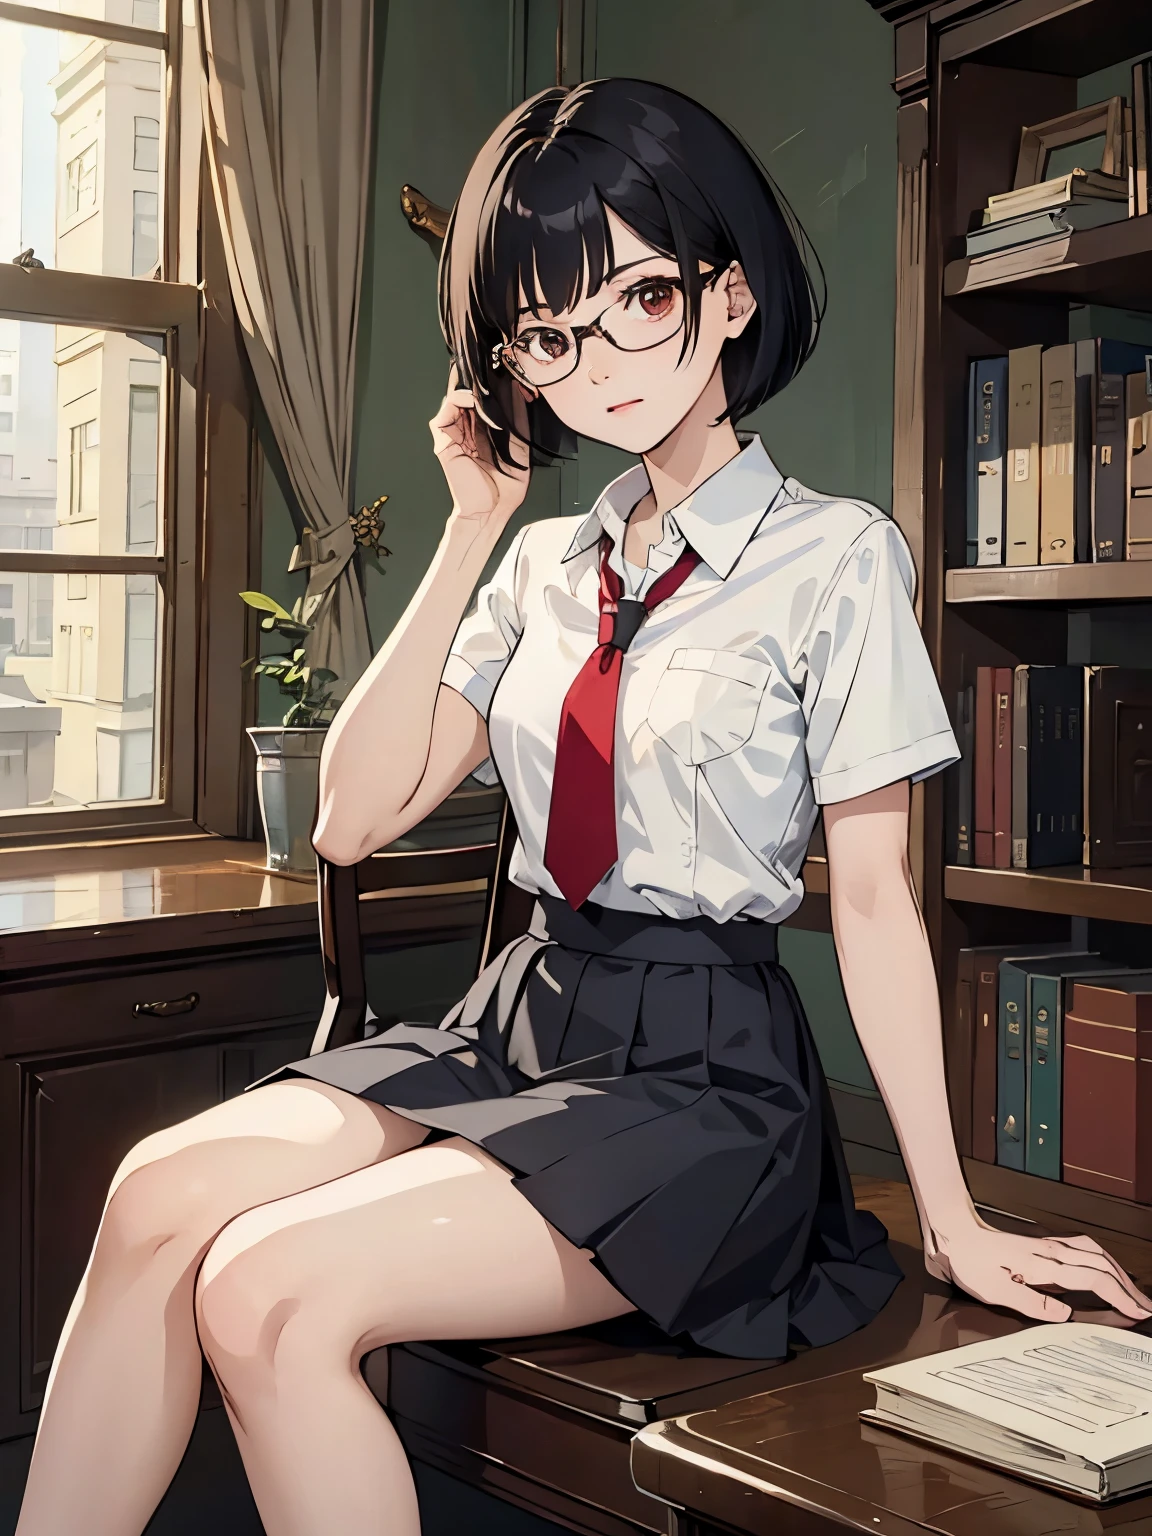 { masterpiece: best quality } { school theme } { background = in a library : books } { Character = Dahyun : fit body : short dark bob hair with smart bangs : wearing glasses : white collar shirt : red tie : black skirt } { Sitting on a chair : studying : serious face k